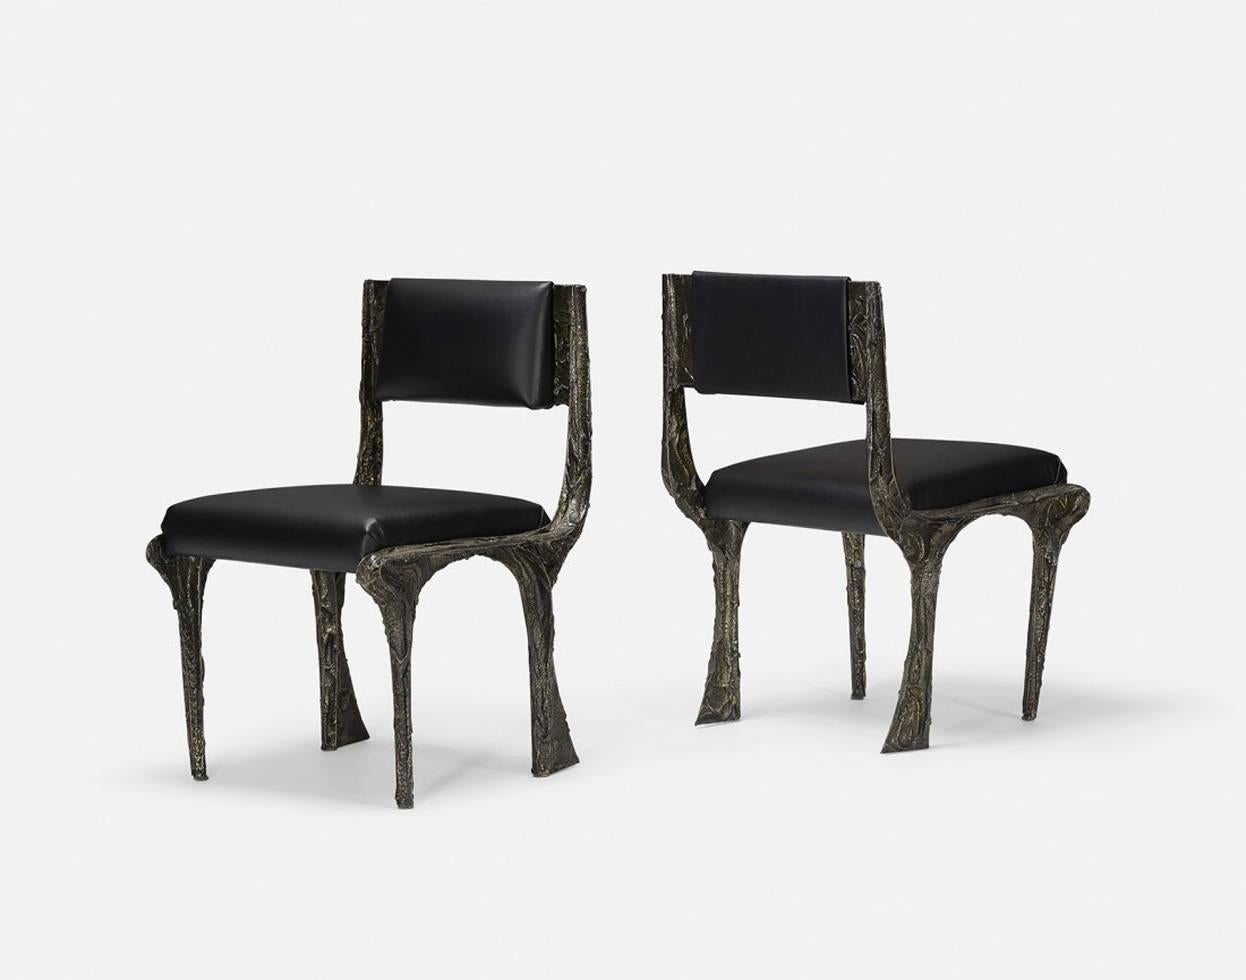 A custom pair of armchairs with leather seats by Paul Evans in sculpted bronze series, circa 1970s. The rare model is a variation of the standard PE chair with playing with the shapes of the legs, and was likely a custom commission directly from